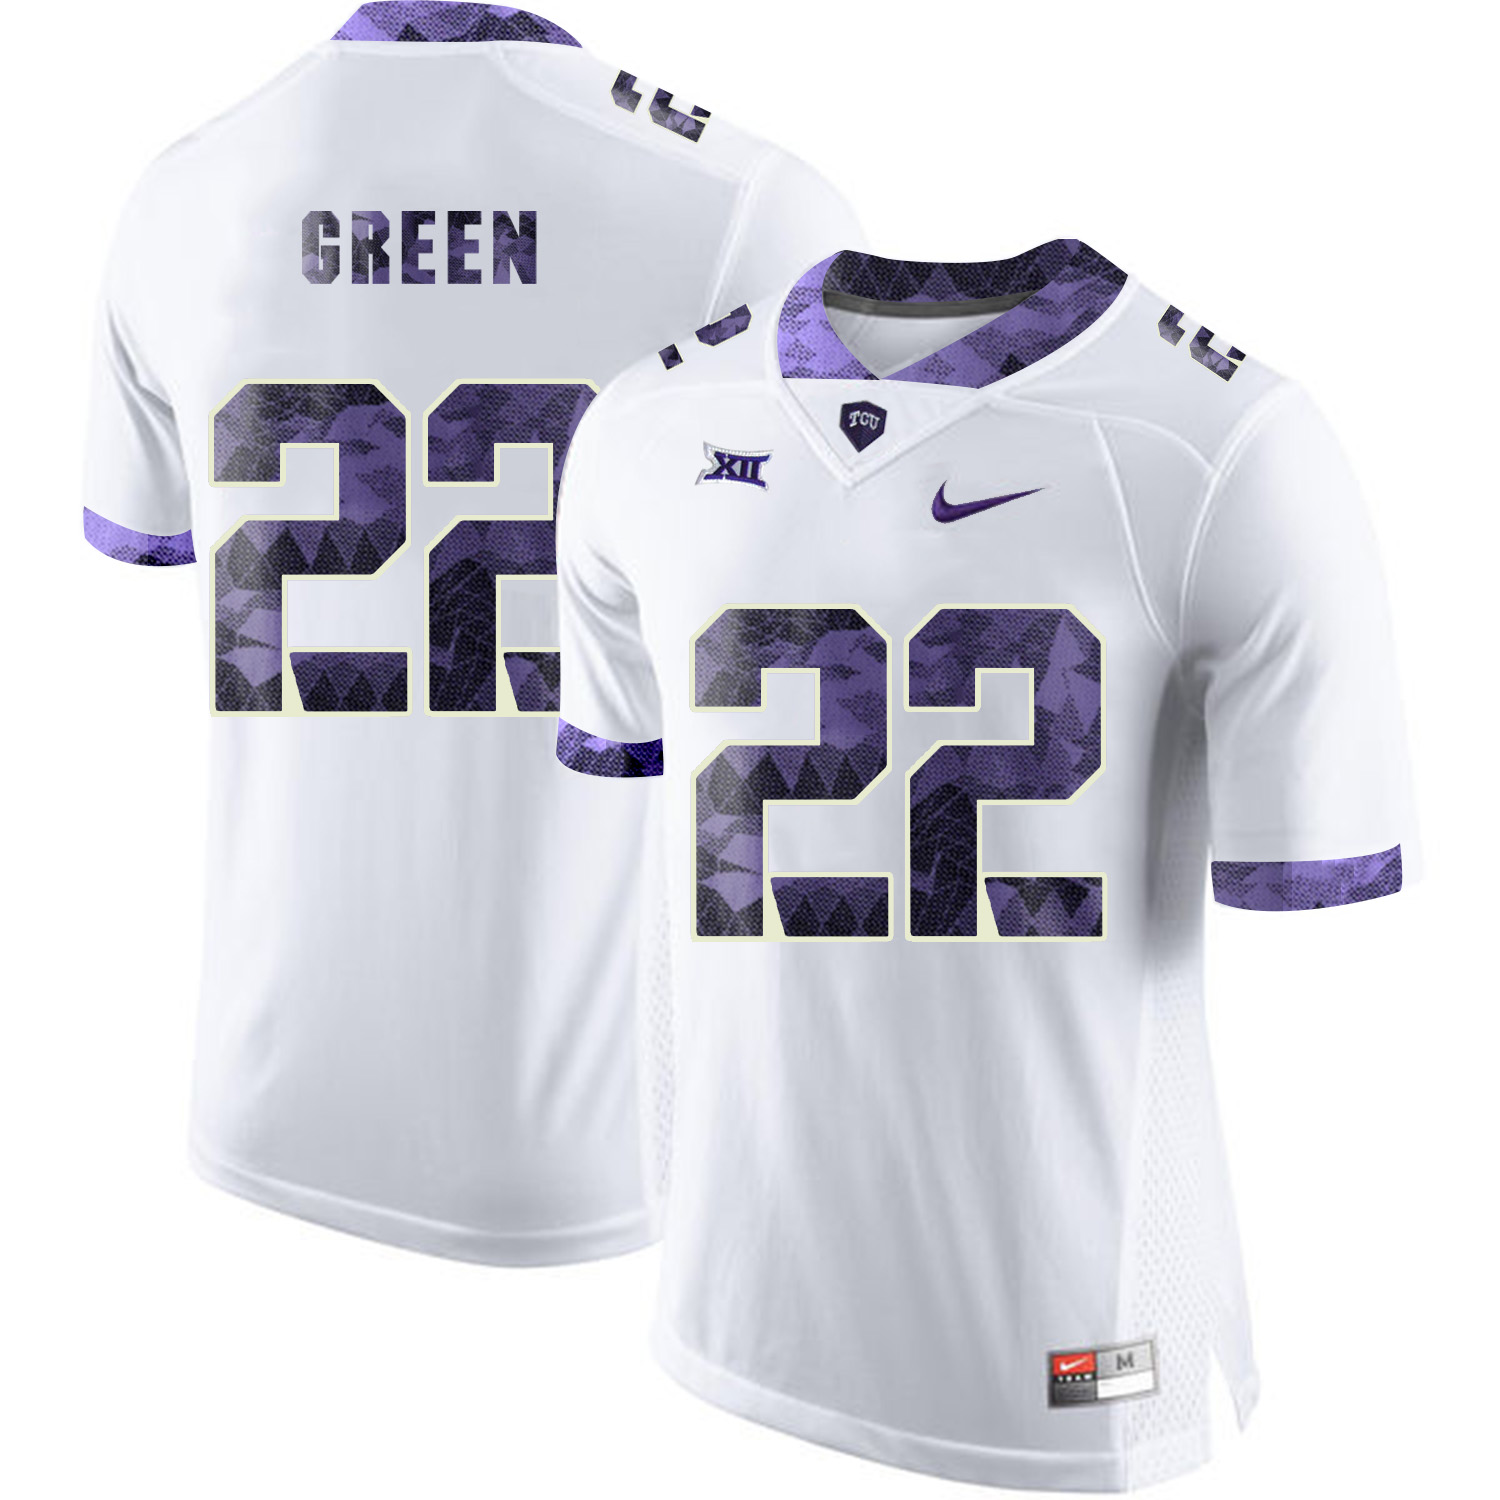 TCU Horned Frogs 22 Aaron Green White Print College Football Limited Jersey